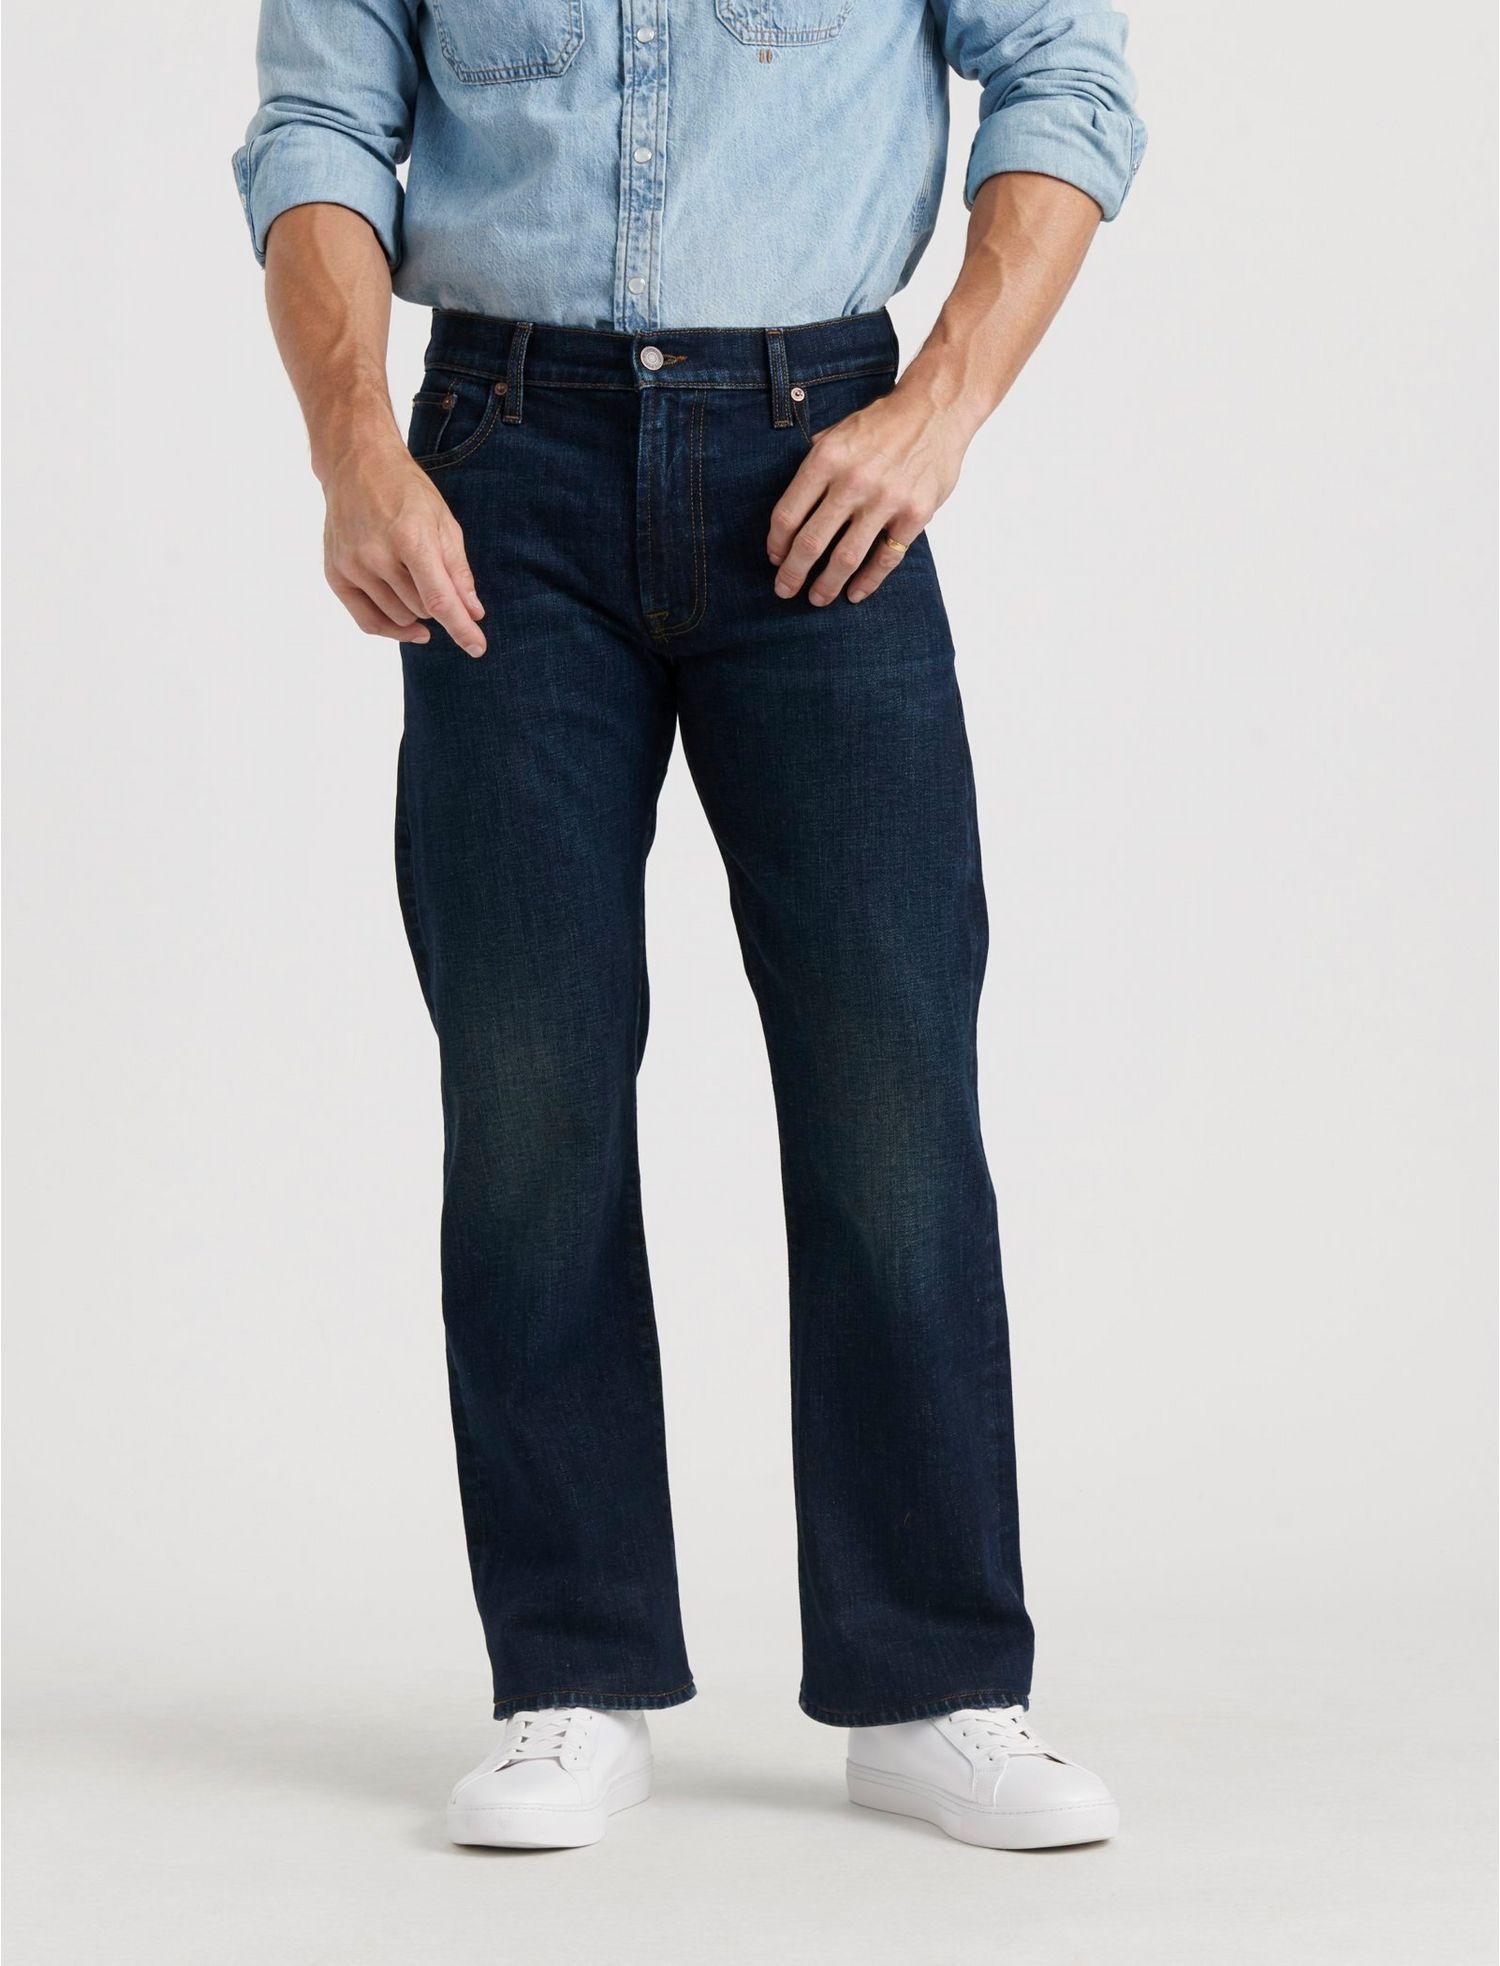 Lucky Brand Cotton 181 Relaxed Straight Jean in Blue for Men - Lyst